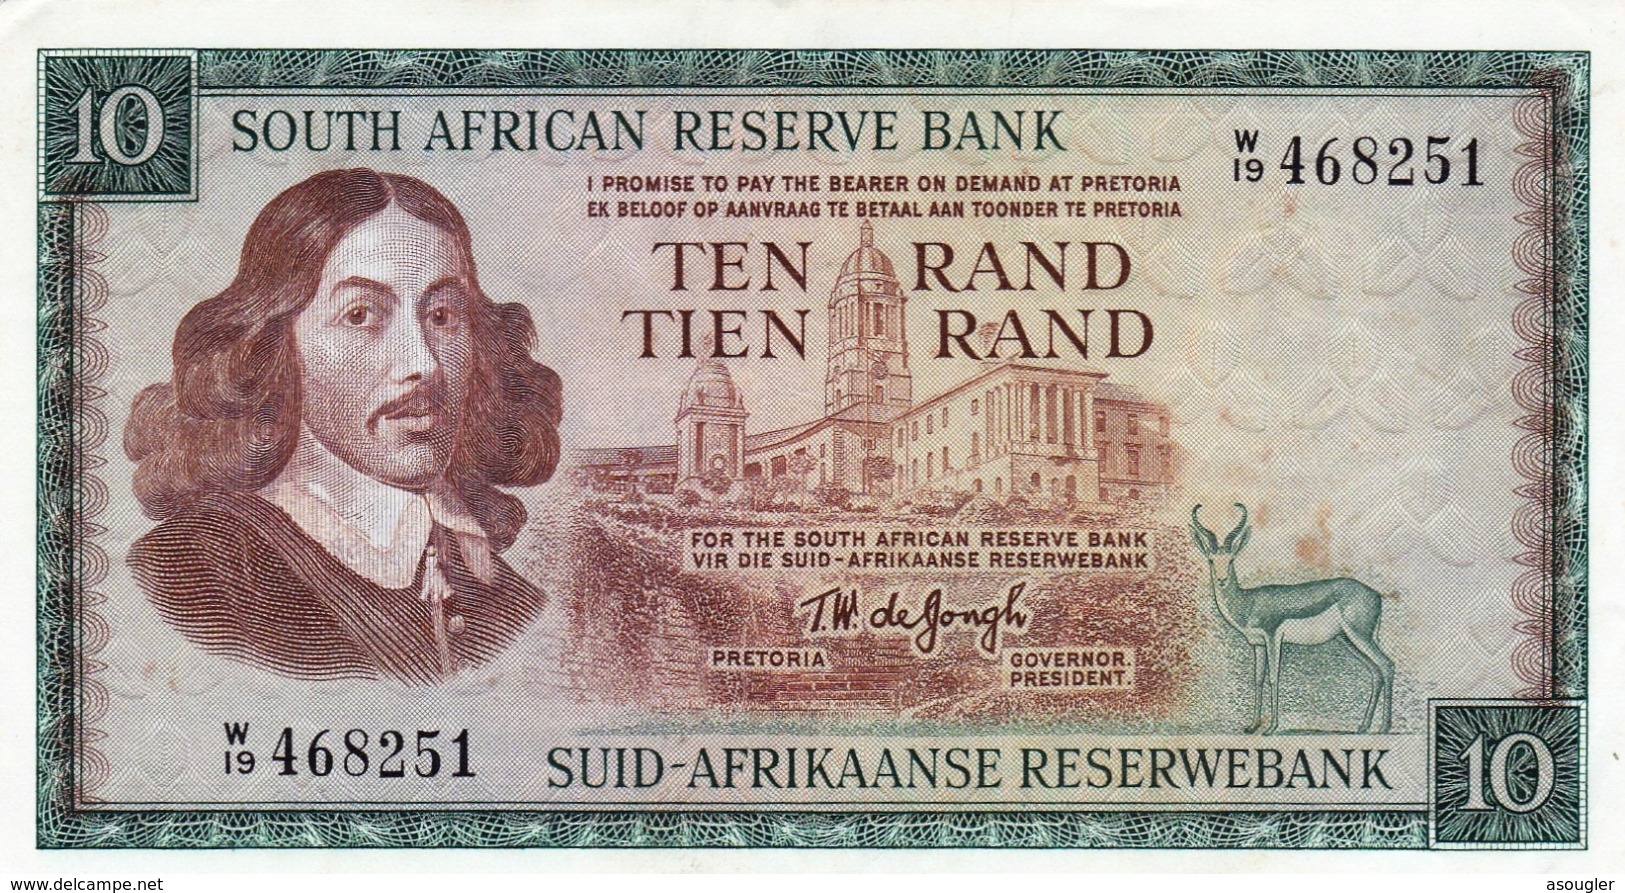 SOUTH AFRICA 10 RAND ND (1975) EXF-AU REPLACEMENT PREFIX "W" P-113c RARE NOTE "Free Shipping Via Registered Air Mail" - South Africa